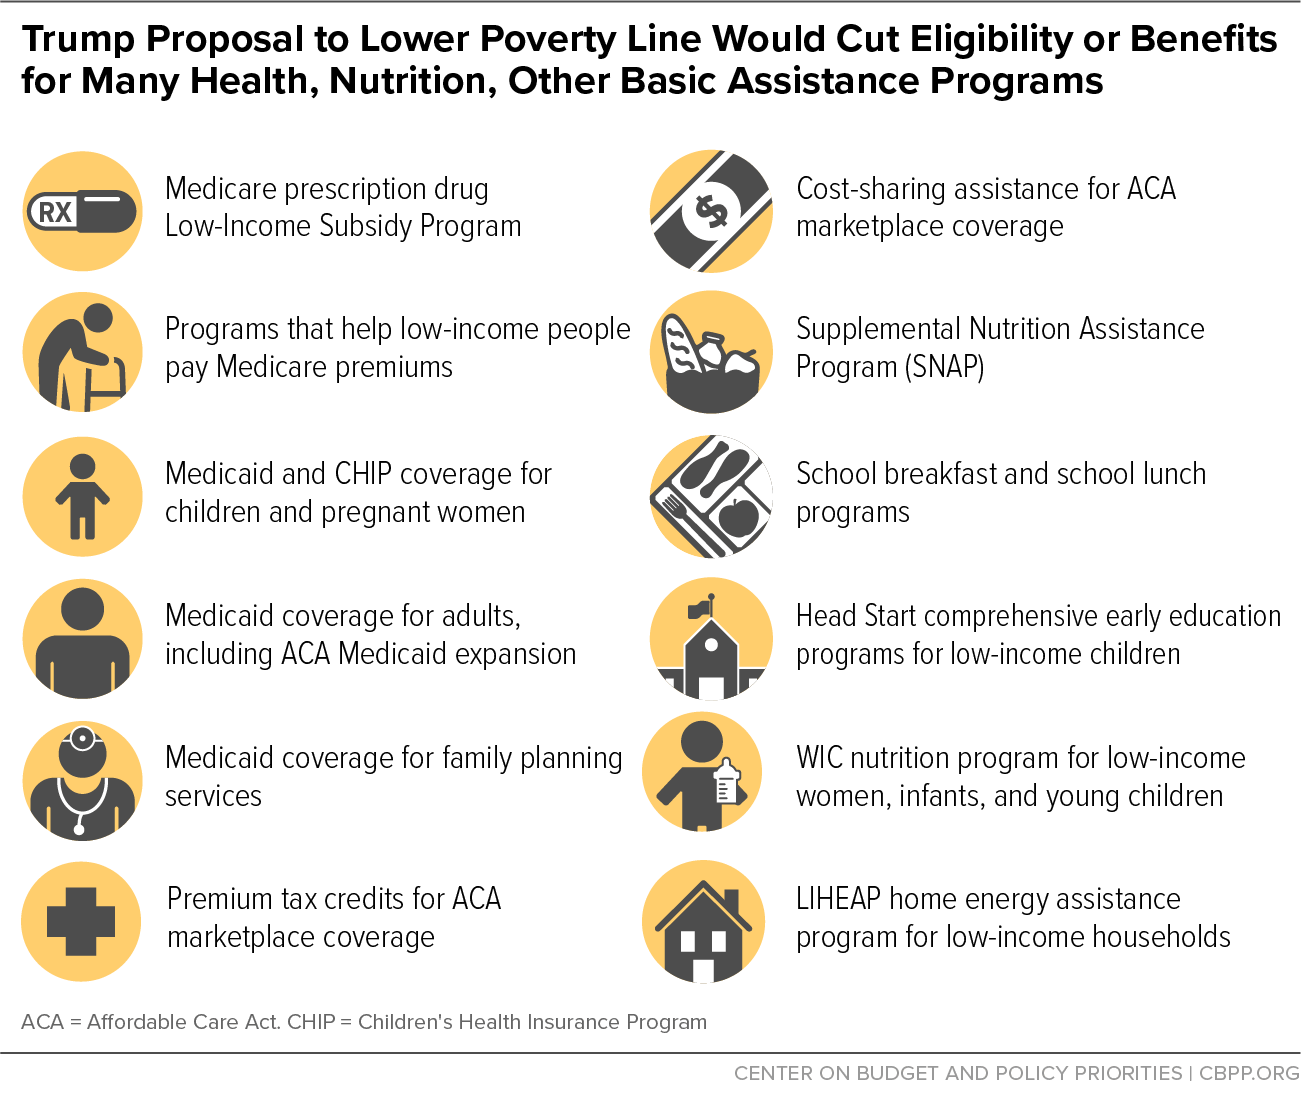 Trump Proposal to Lower Poverty Line Would Cut Eligibility or Benefits for Many Health, Nutrition, Other Basic Assistance Programs